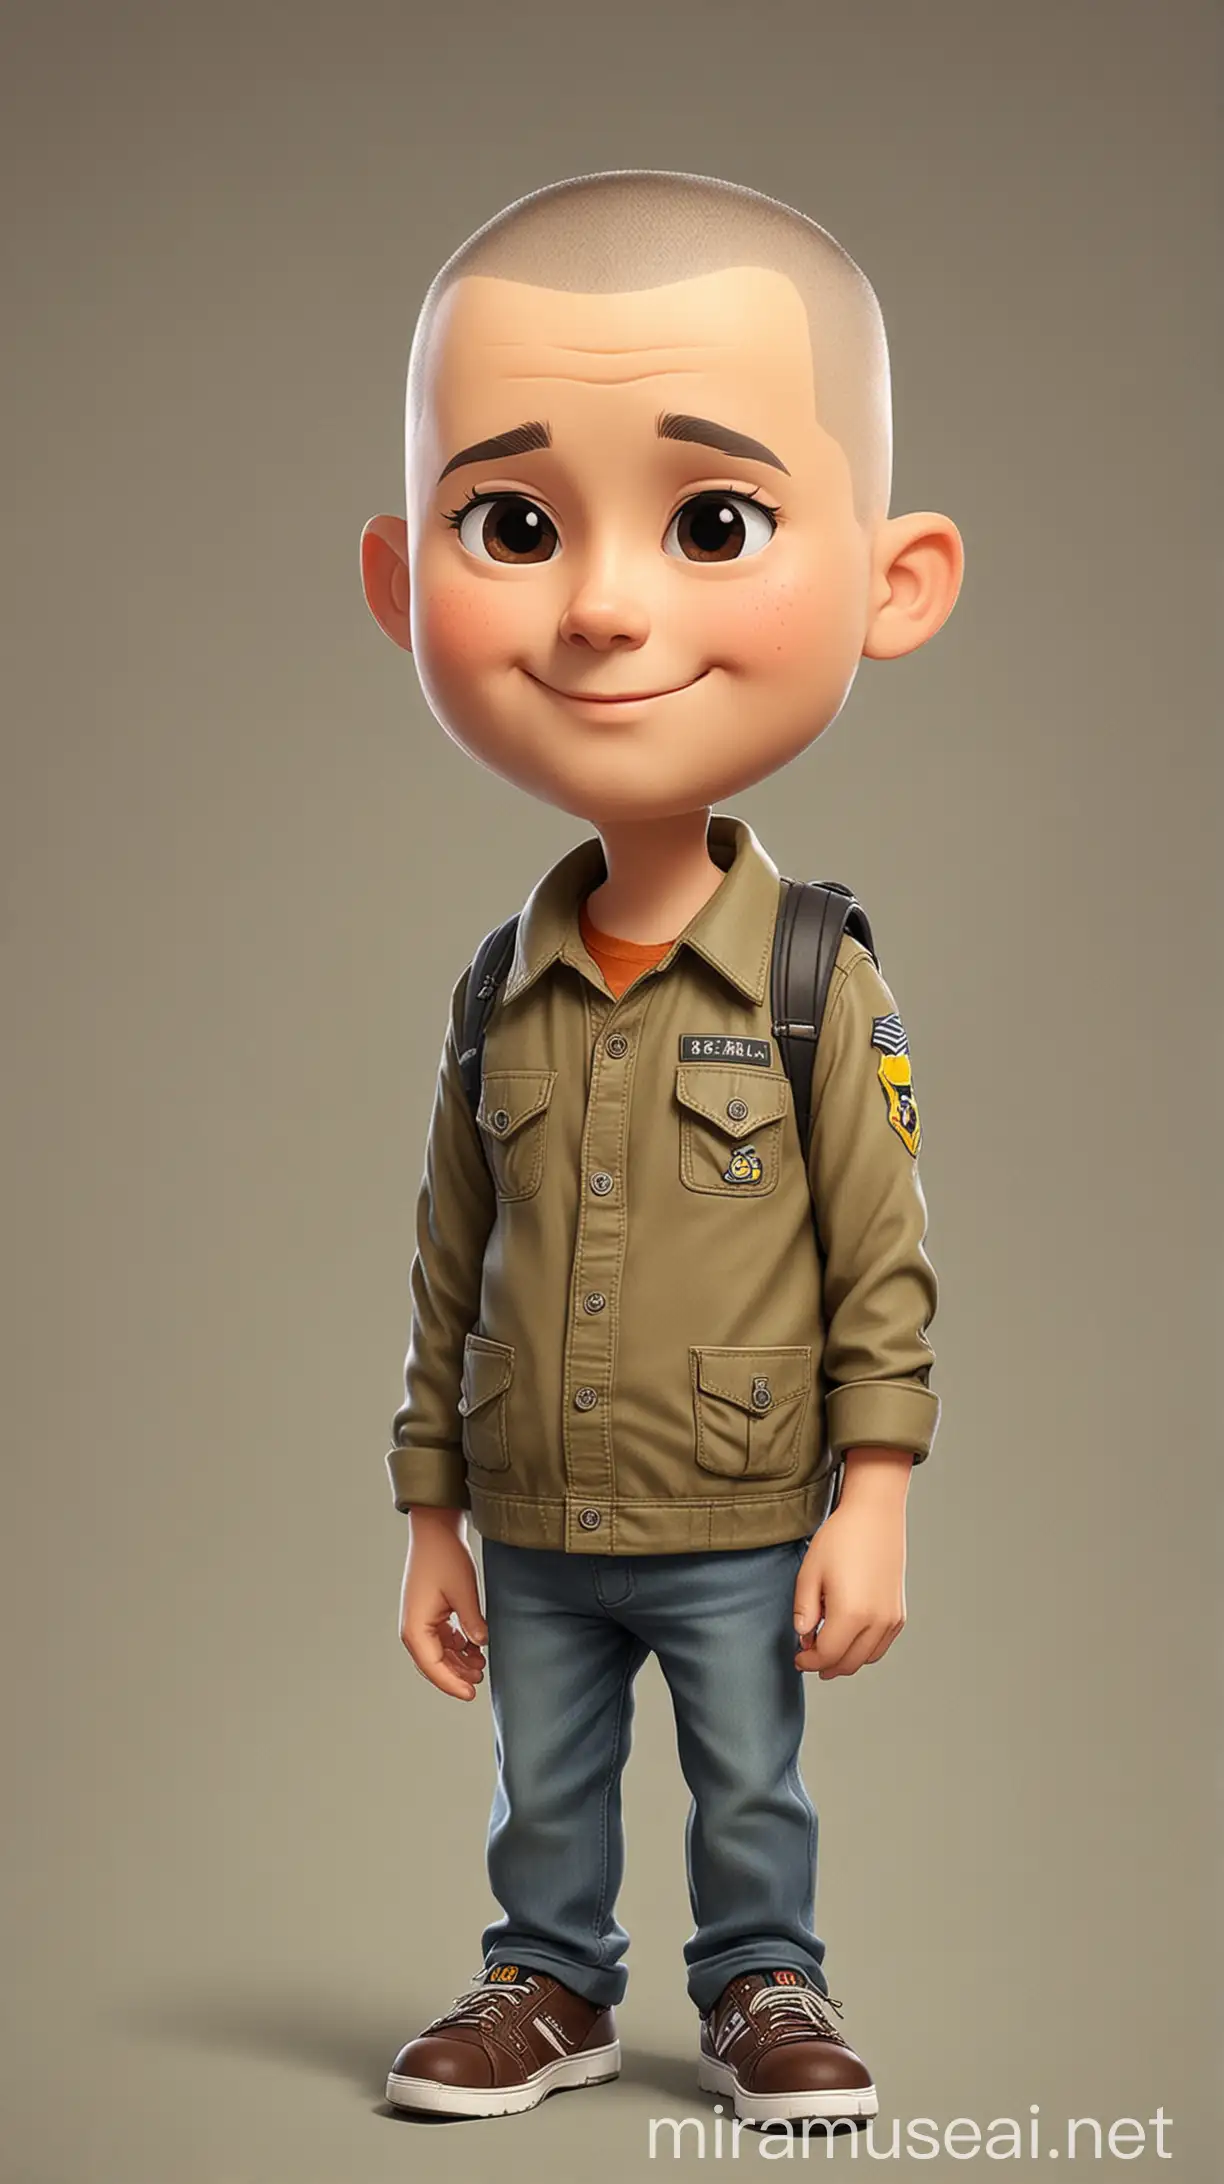 Proud MiddleAged Man with Buzz Cut in Chibi Style Kindergarten Setting